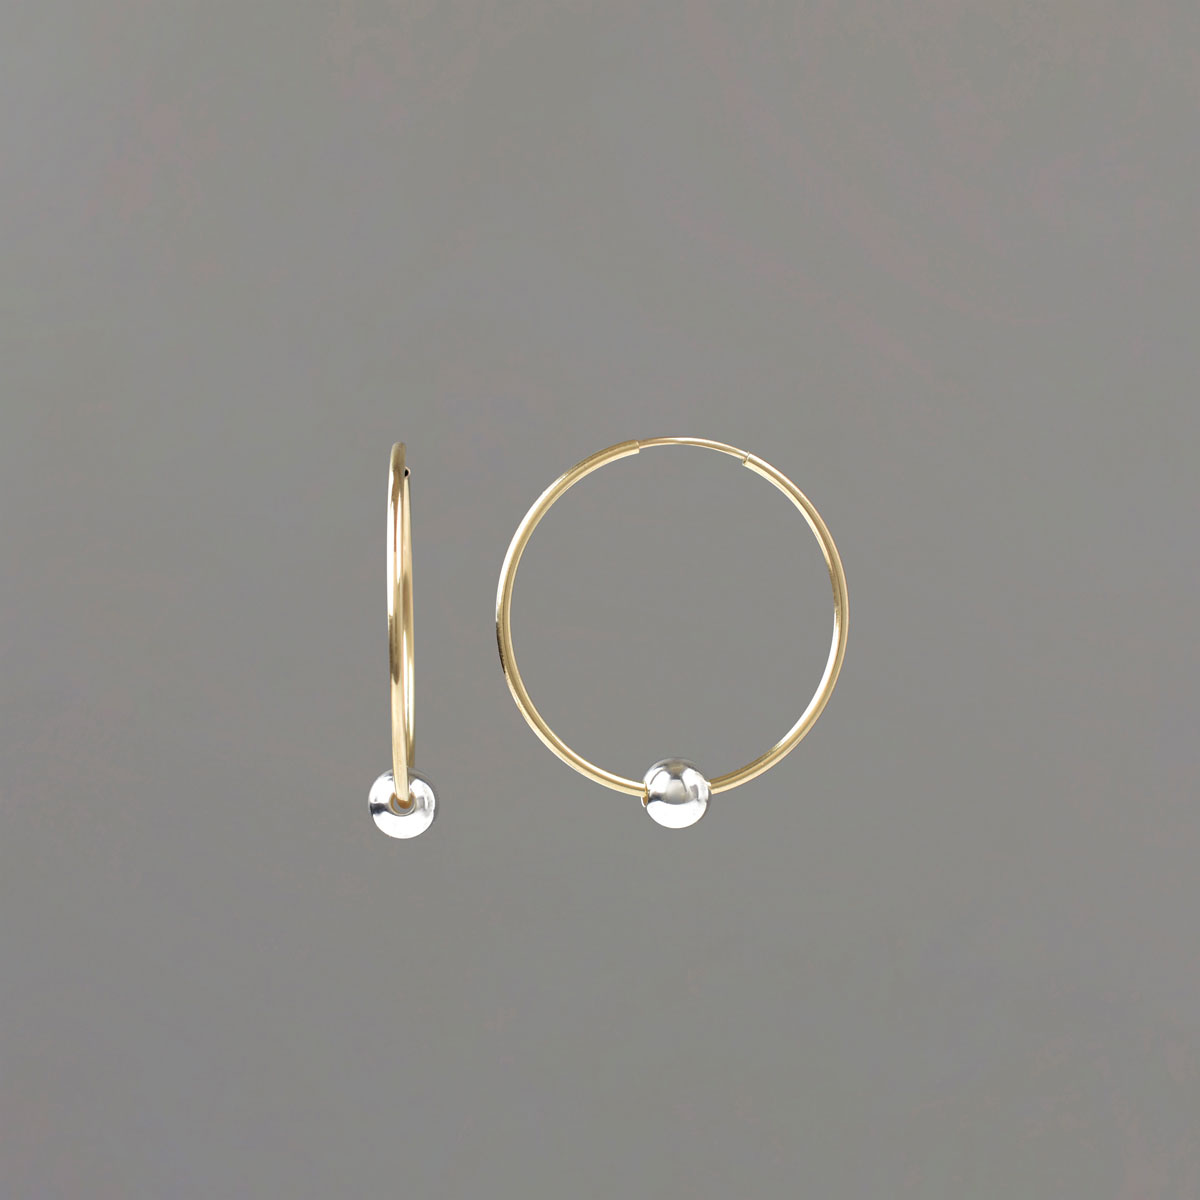 Small Gold Hoop Earring with Silver Balls